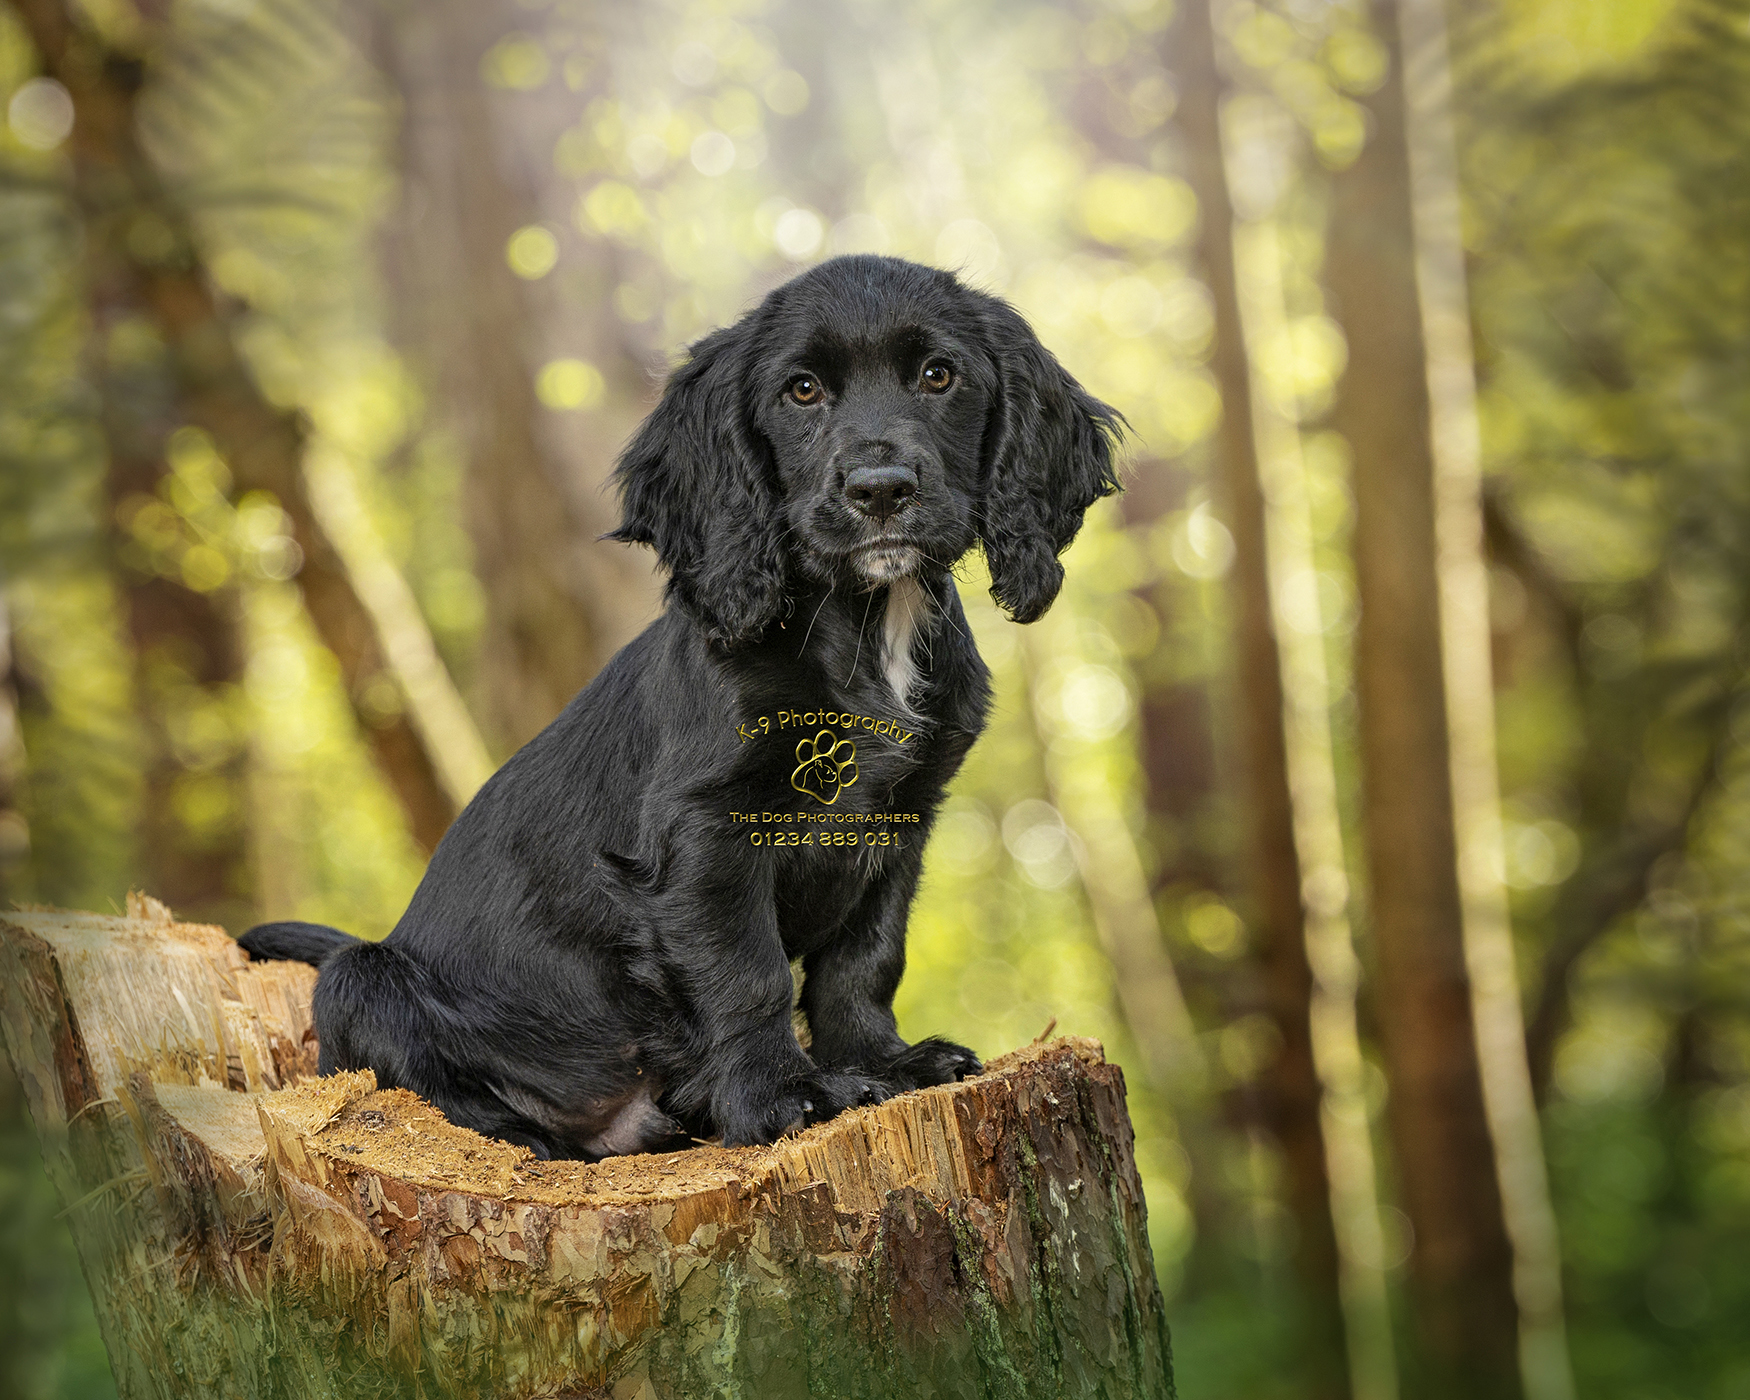 Tips on Photographing your dog